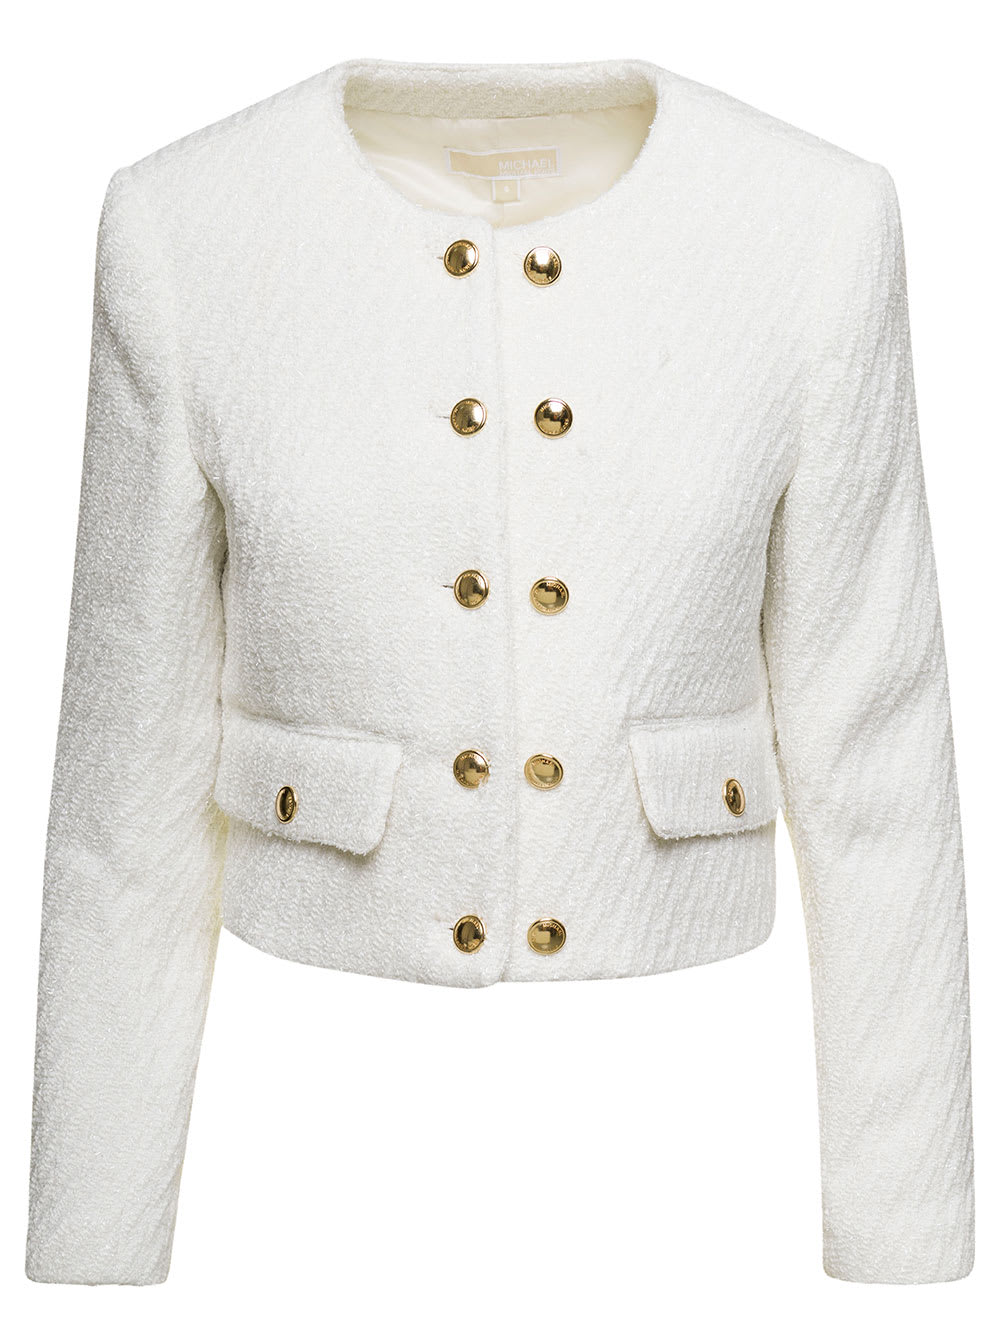 MICHAEL MICHAEL KORS WHITE CROPPED JACKET WITH GOLDEN BUTTONS IN TWEED WOMAN